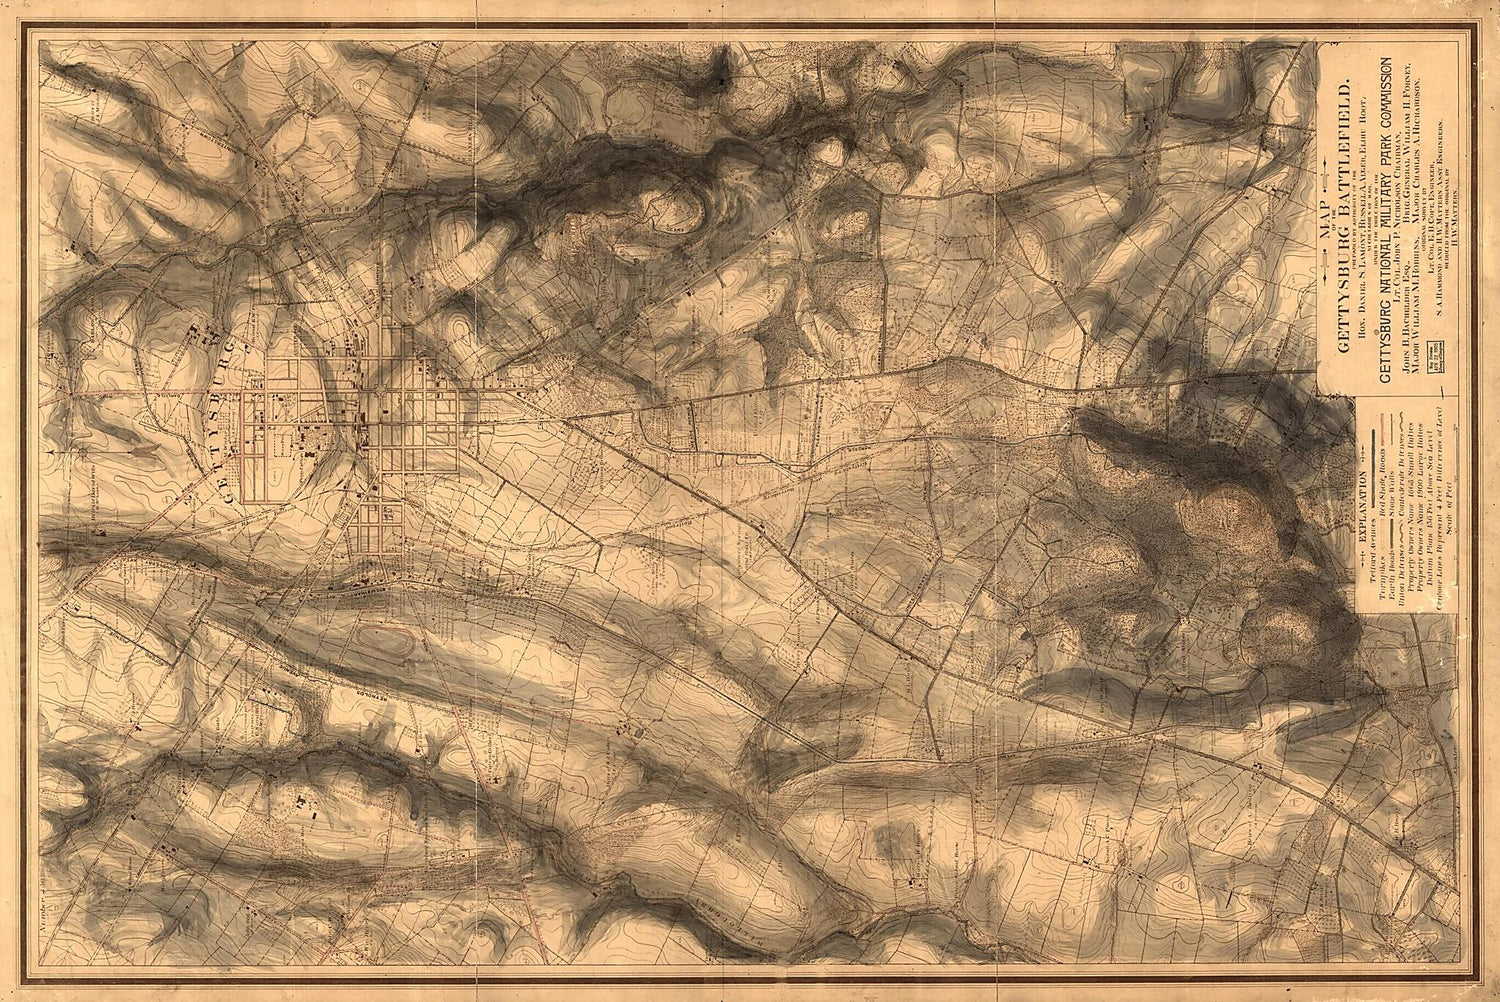 This old map of Map of the Gettysburg Battlefield from 1900 was created by Emmor B. Cope,  Gettysburg National Military Park Commission, H. W. Mattern in 1900